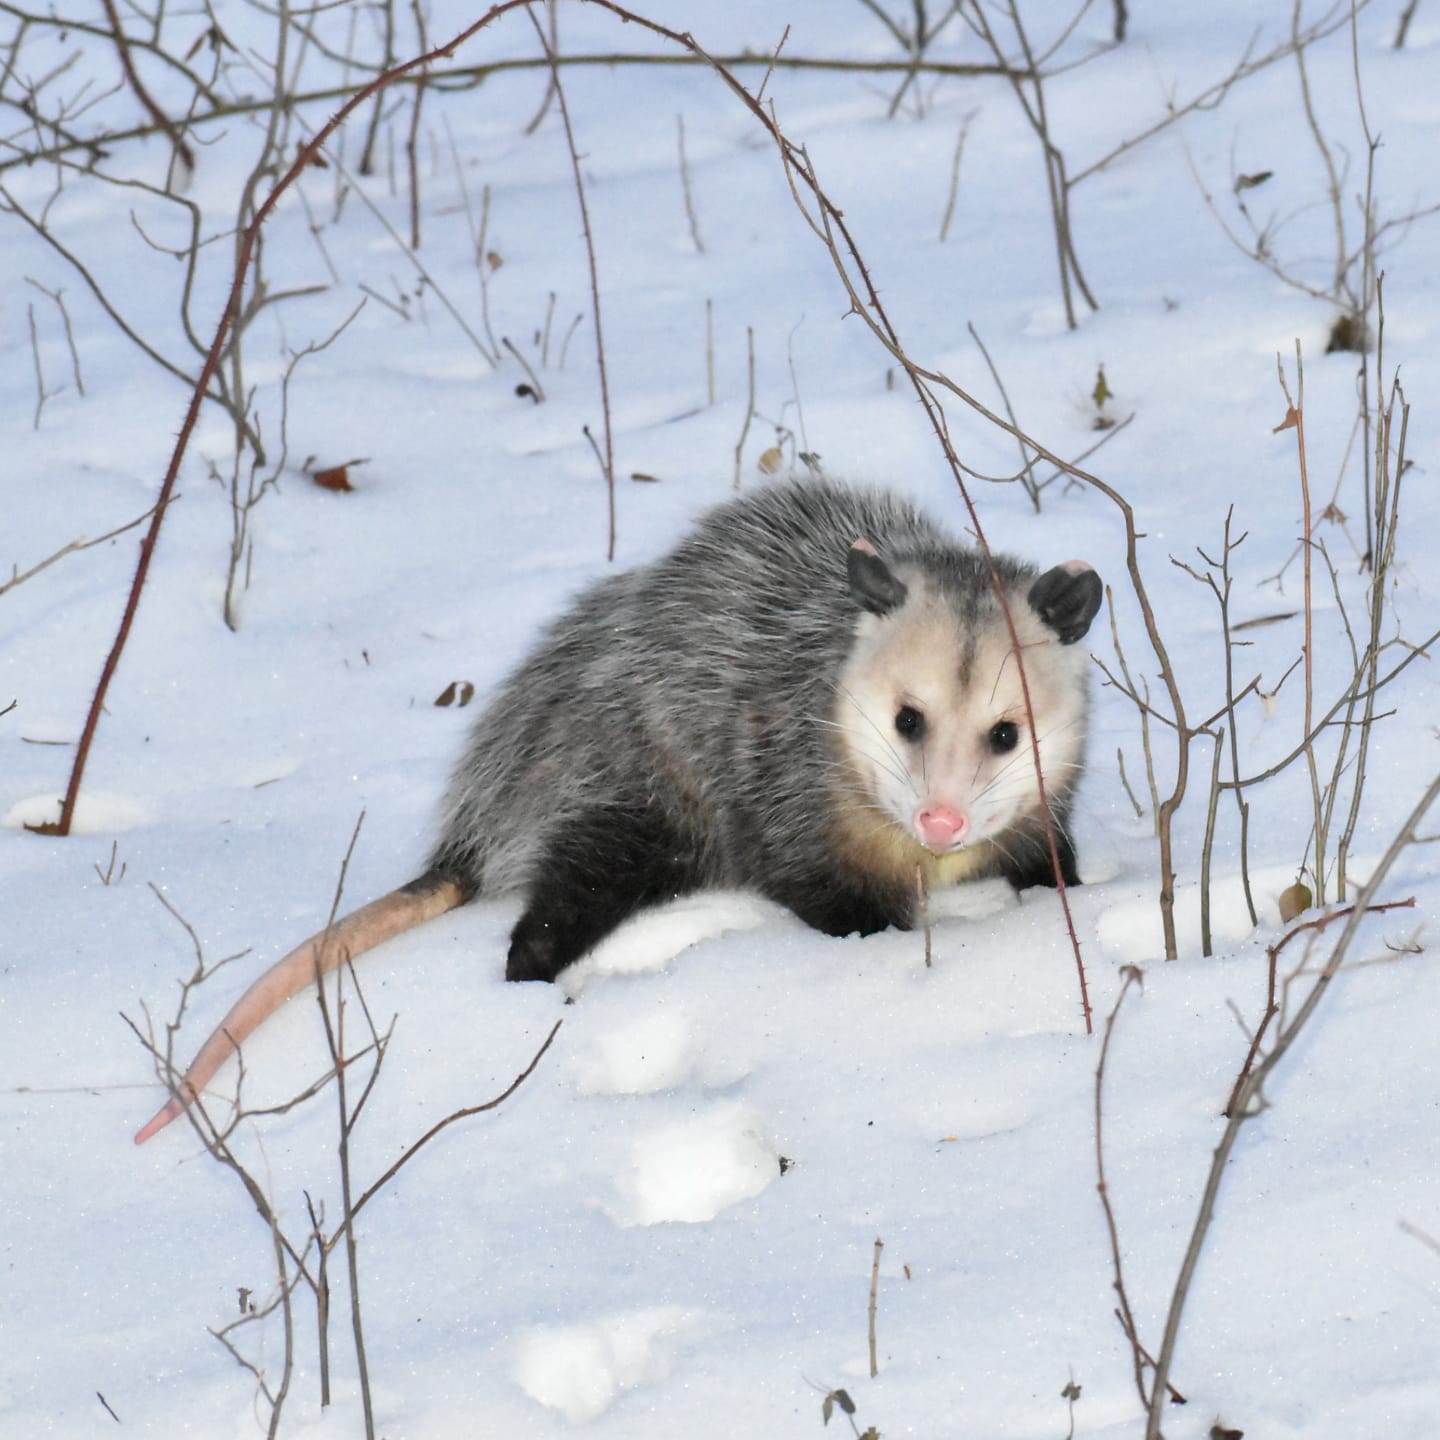 The Virginia Opossum and their ecosystem benefits